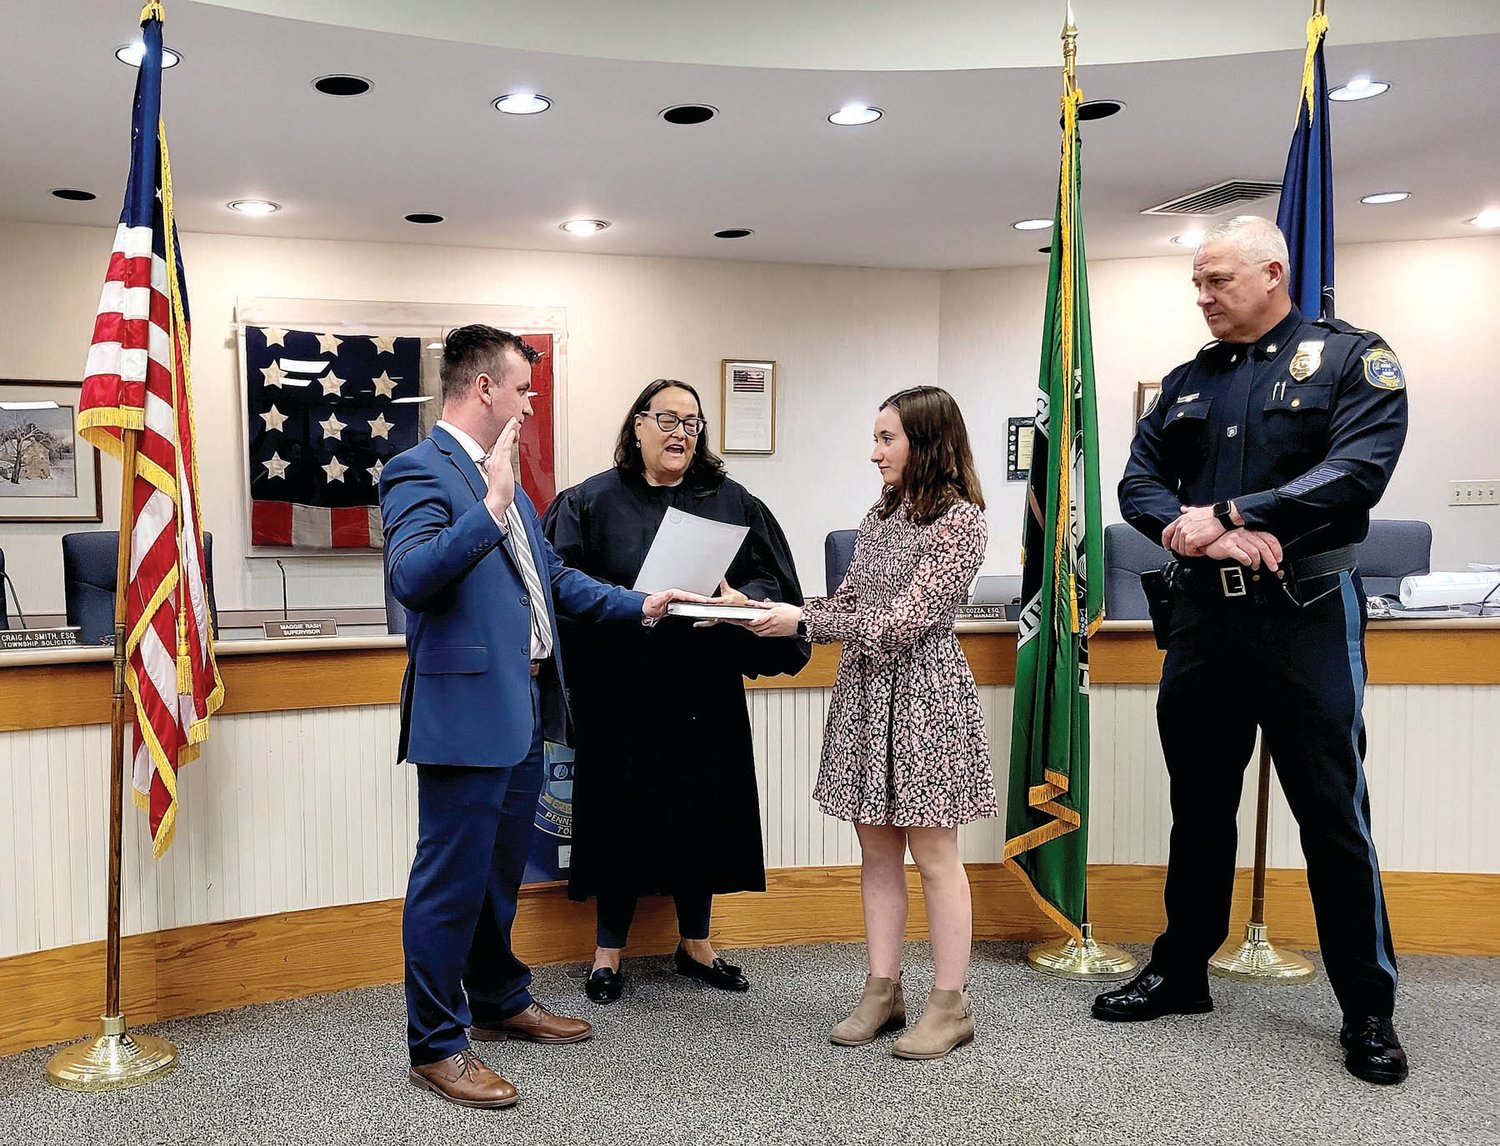 Buckingham Township Police Officer Emmett Shanks is sworn in by District Justice Maggie Snow at the March 22 supervisors meeting as a friend looks on.